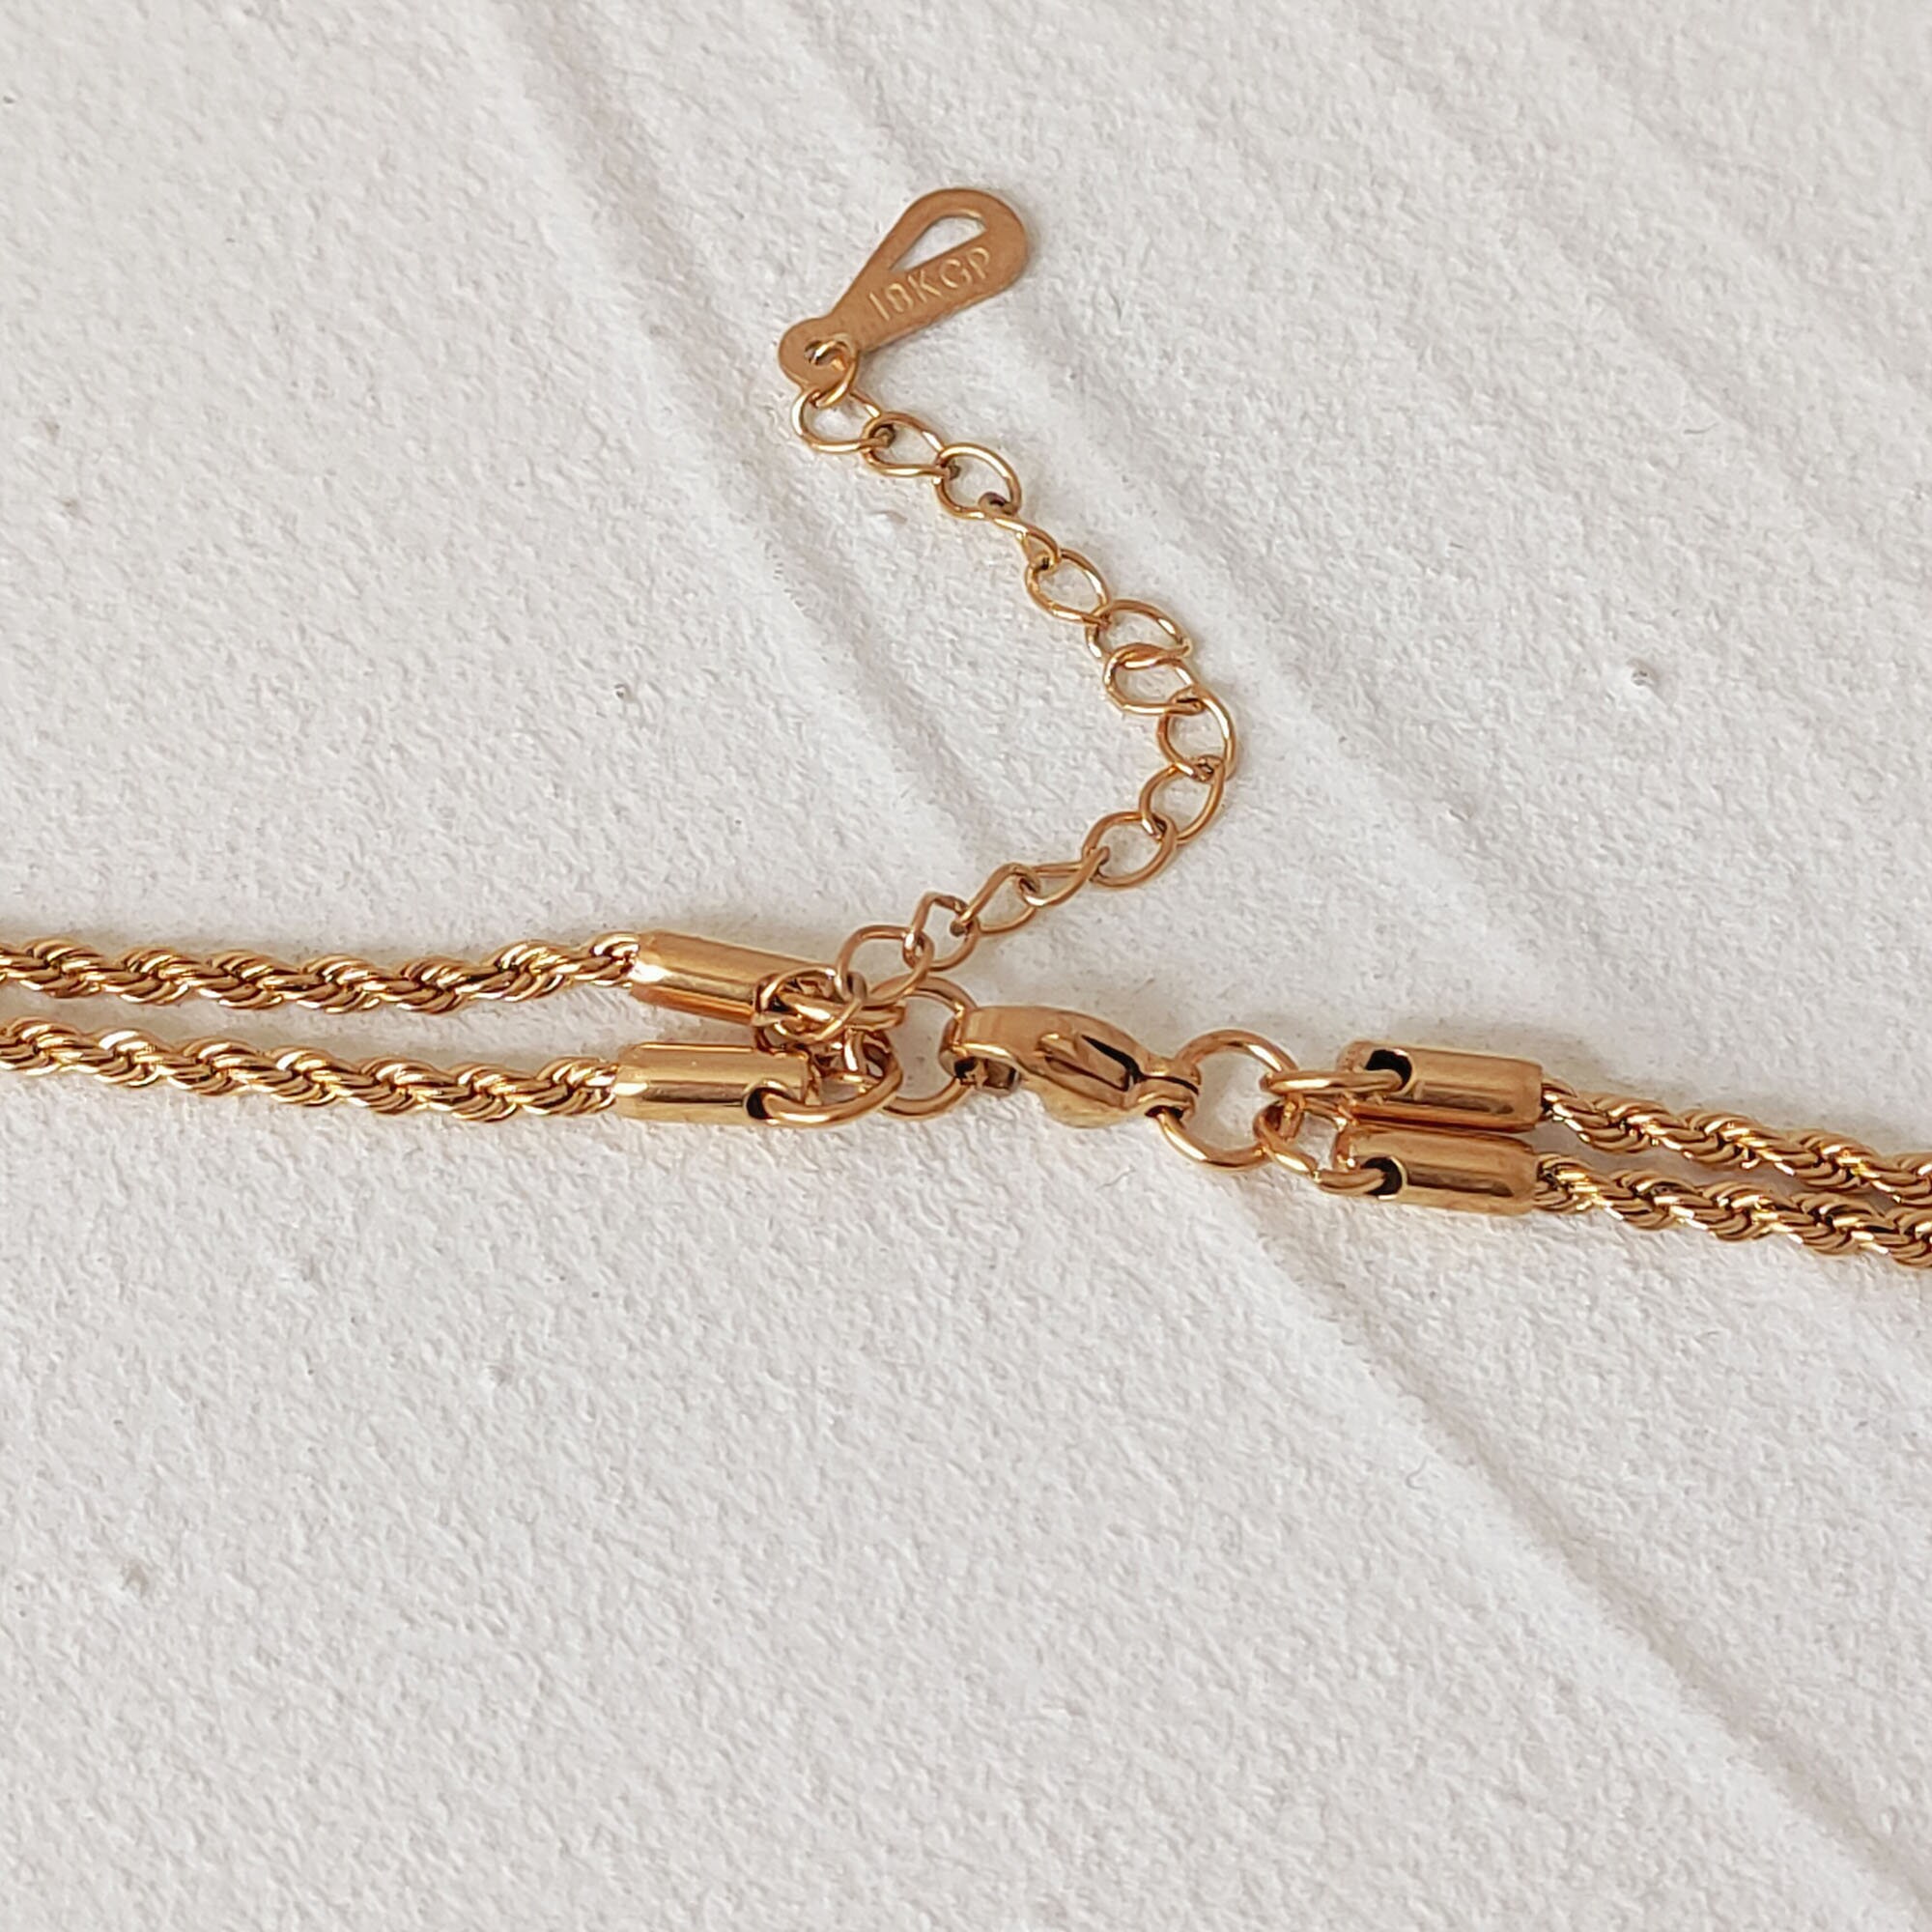 Rope Knot Necklace Twist Chain Necklace Double Rope Chain - Etsy